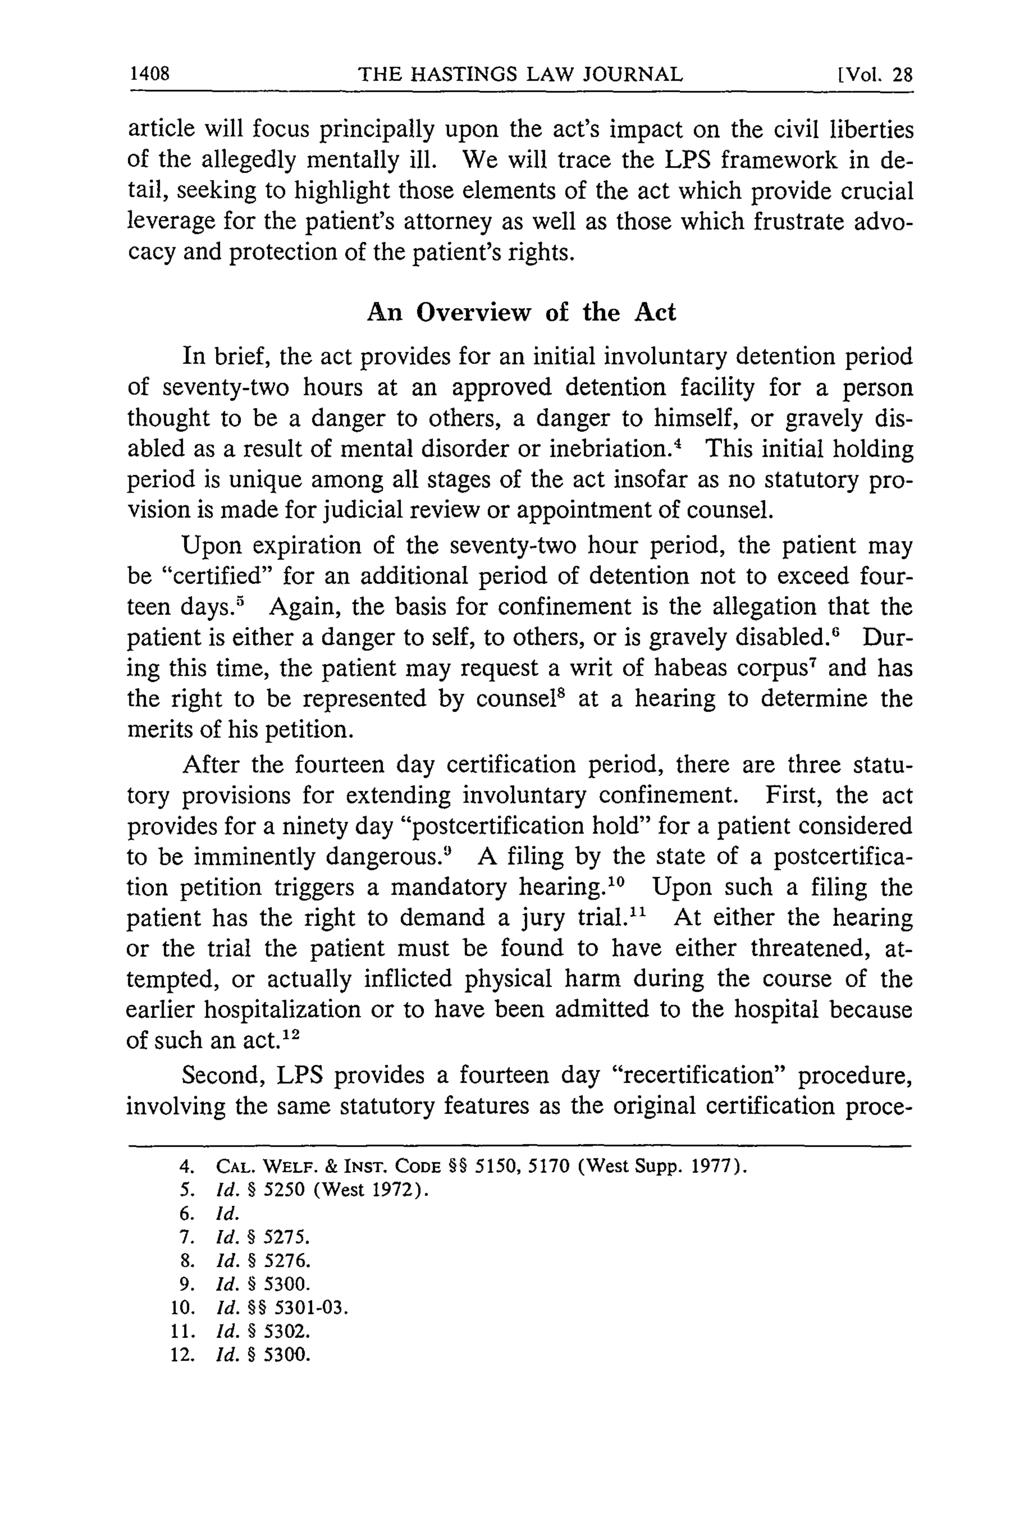 THE HASTINGS LAW JOURNAL [Vol, 28 article will focus principally upon the act's impact on the civil liberties of the allegedly mentally ill.